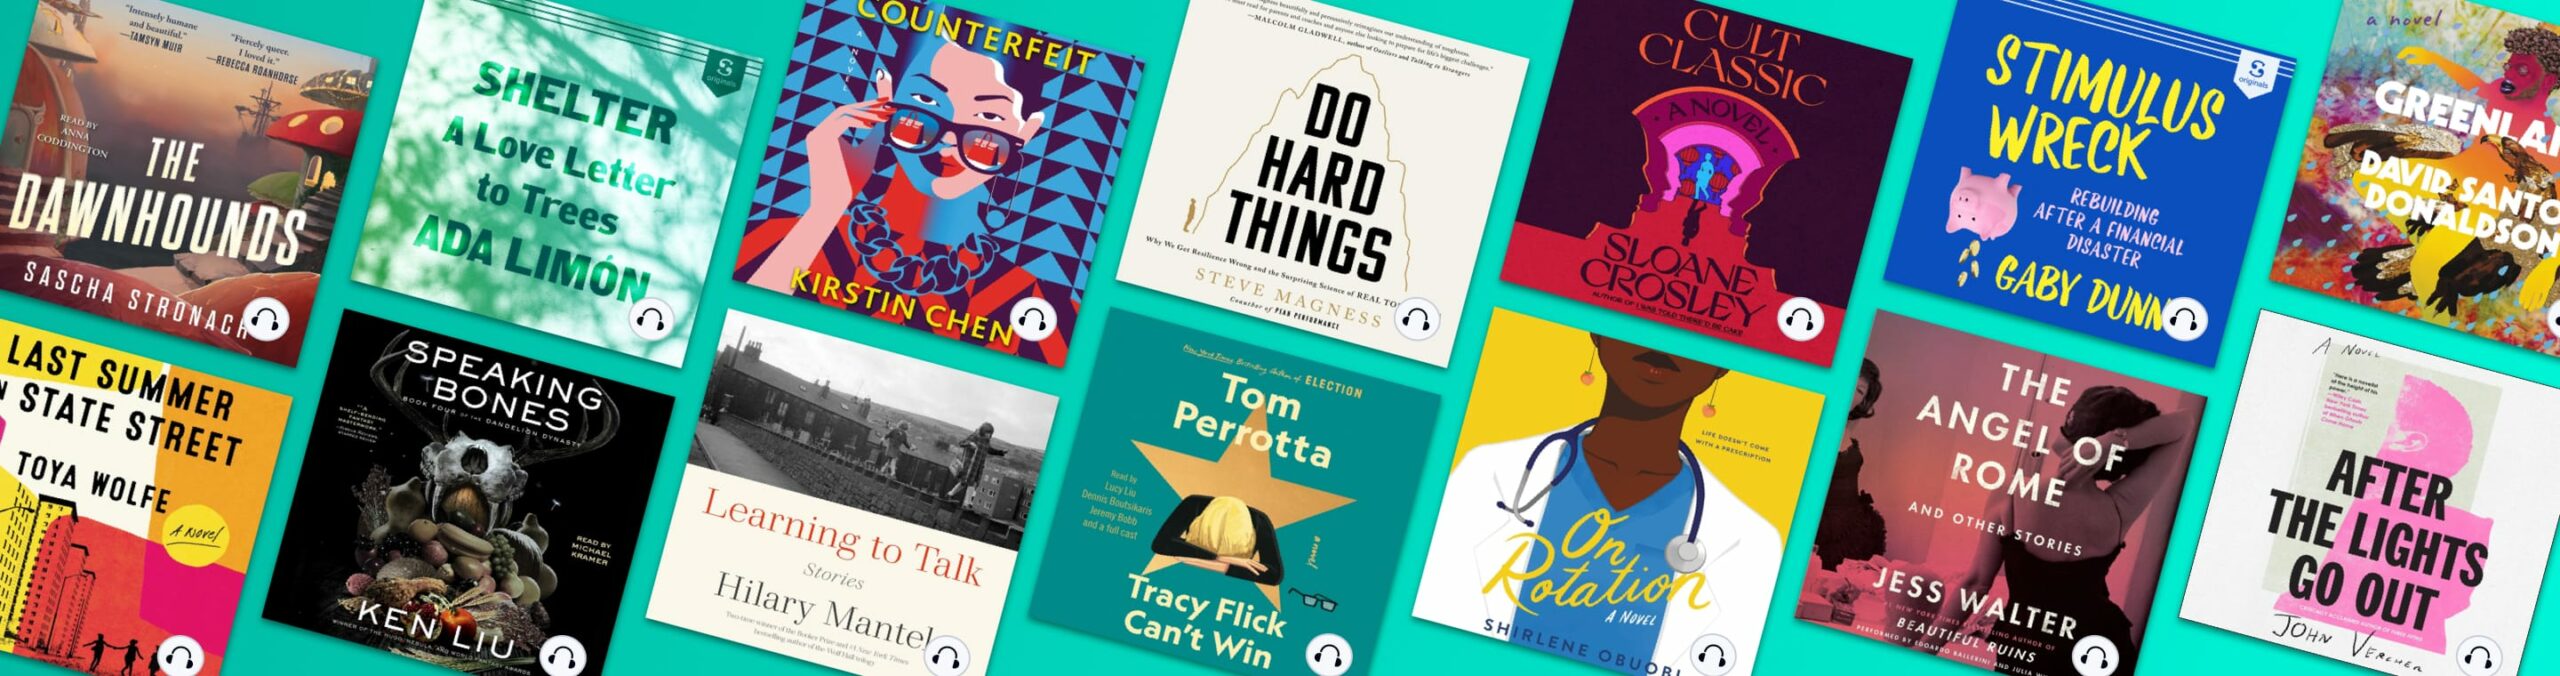 June’s Best New Books just in time for summer reading